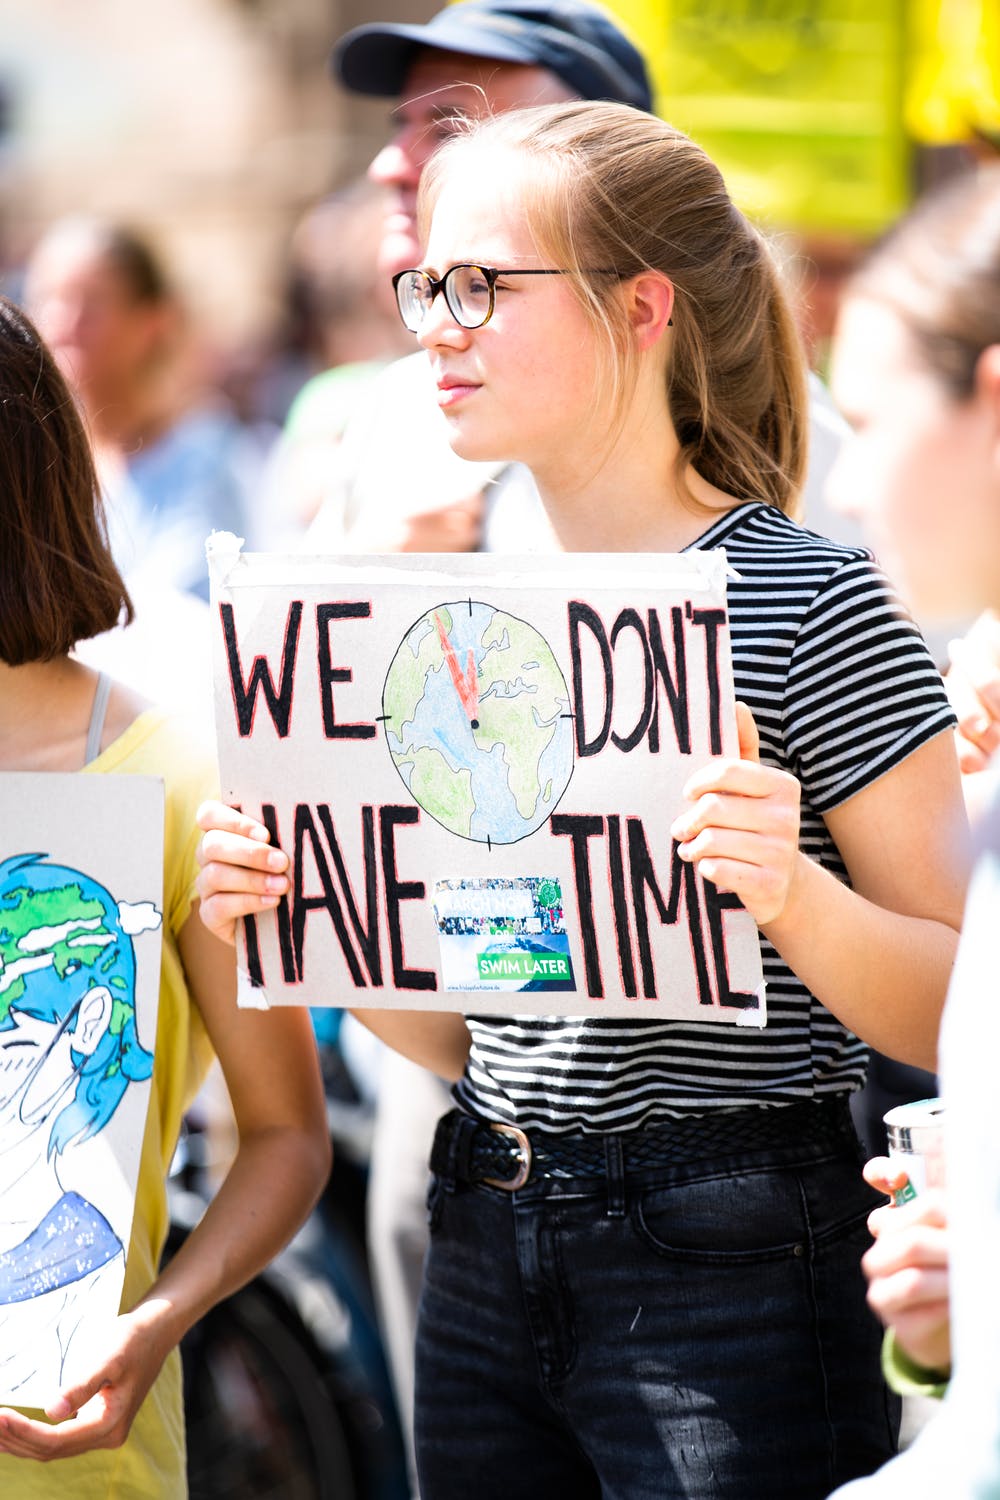 We no longer have time to save the Planet: 3 reasons to participate in #FridaysForFuture